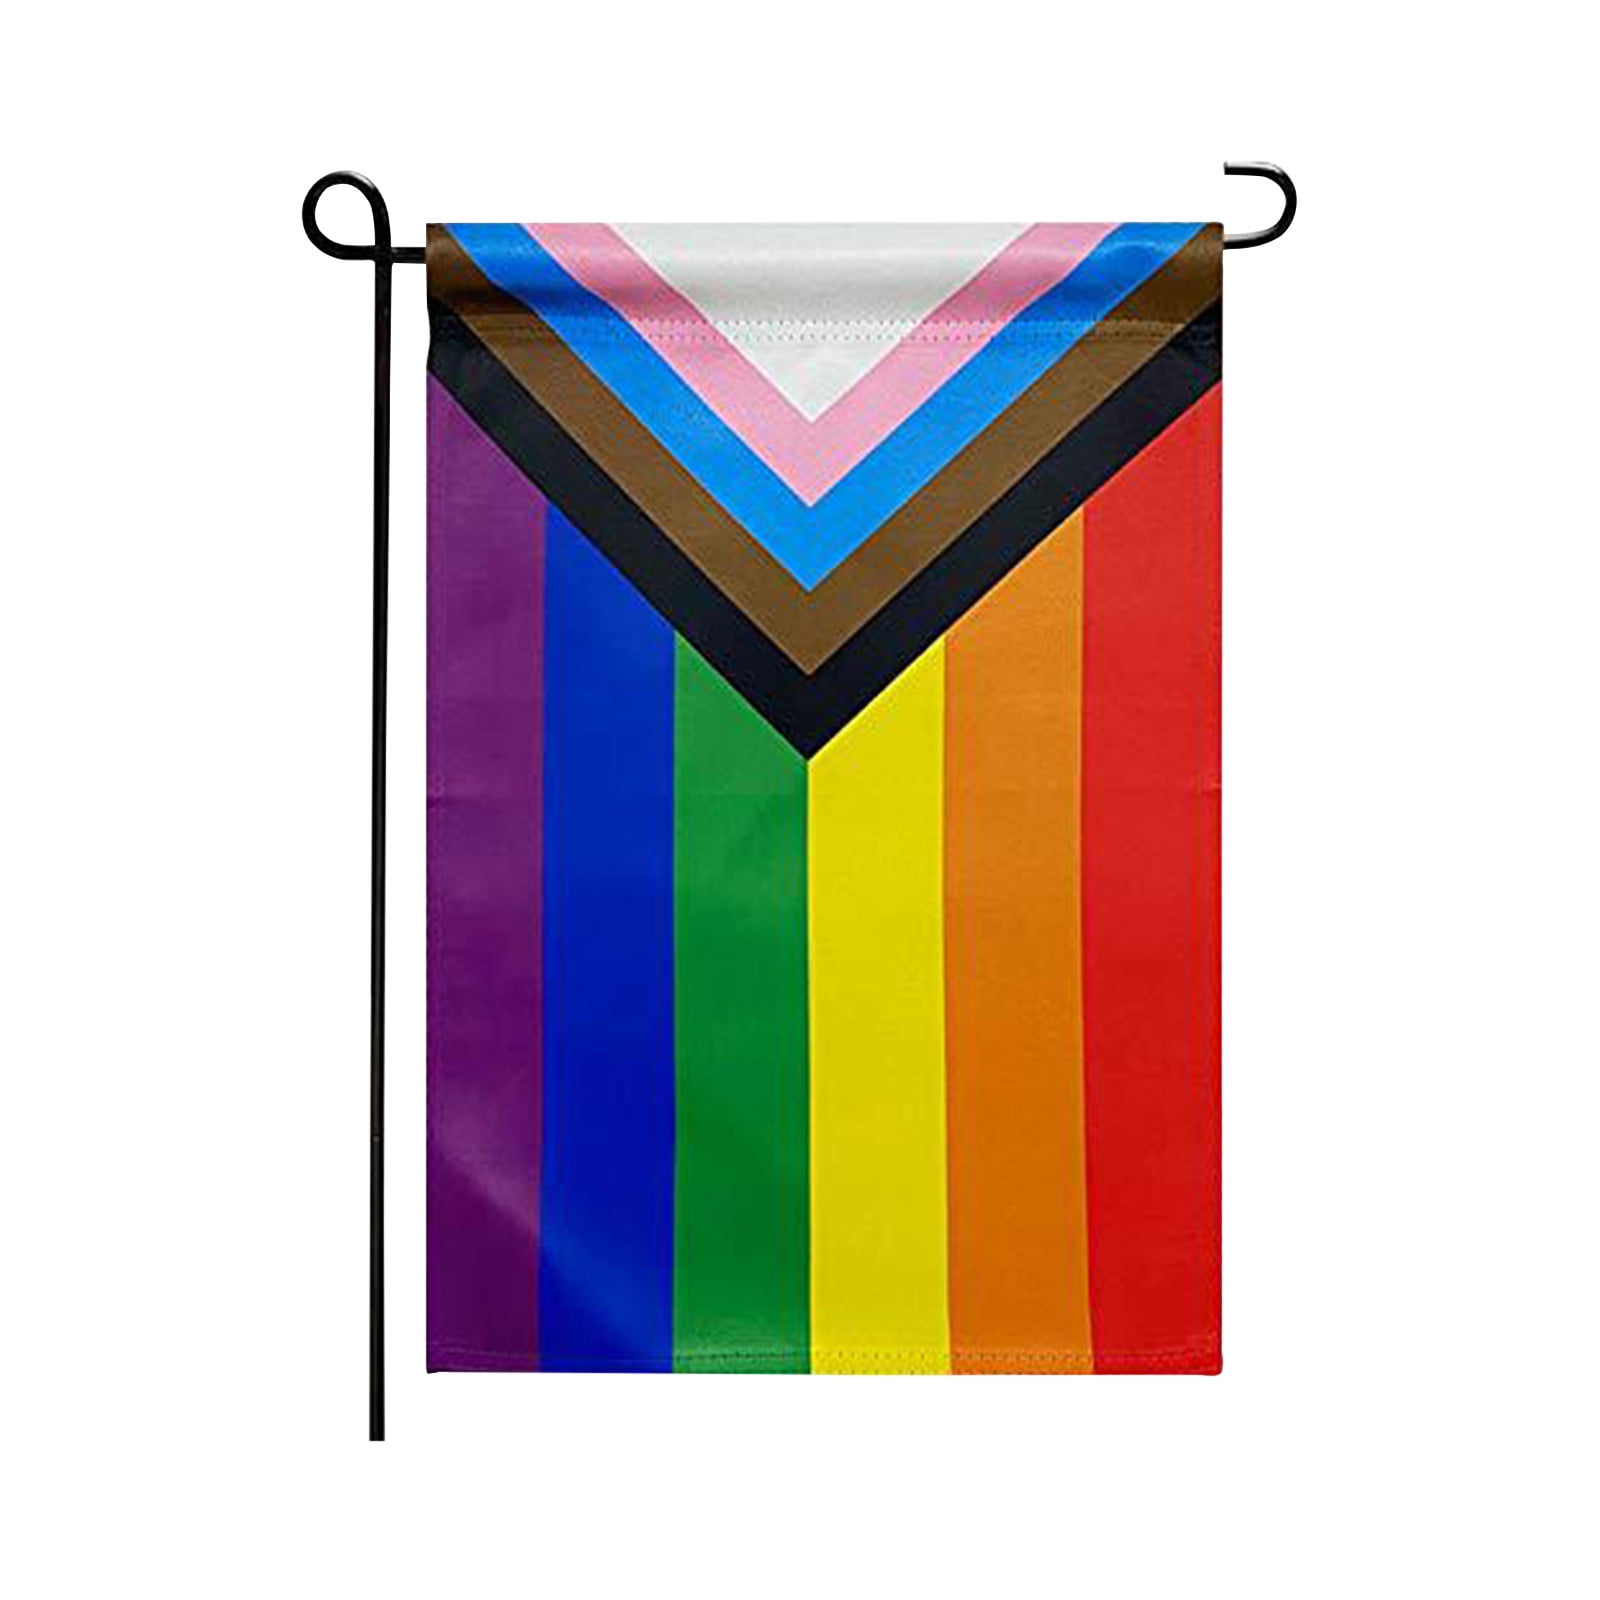 Details about   Rainbow Flag 3x5 FT Polyester Flag Gay Pride Lesbian Peace LGBT Flag 